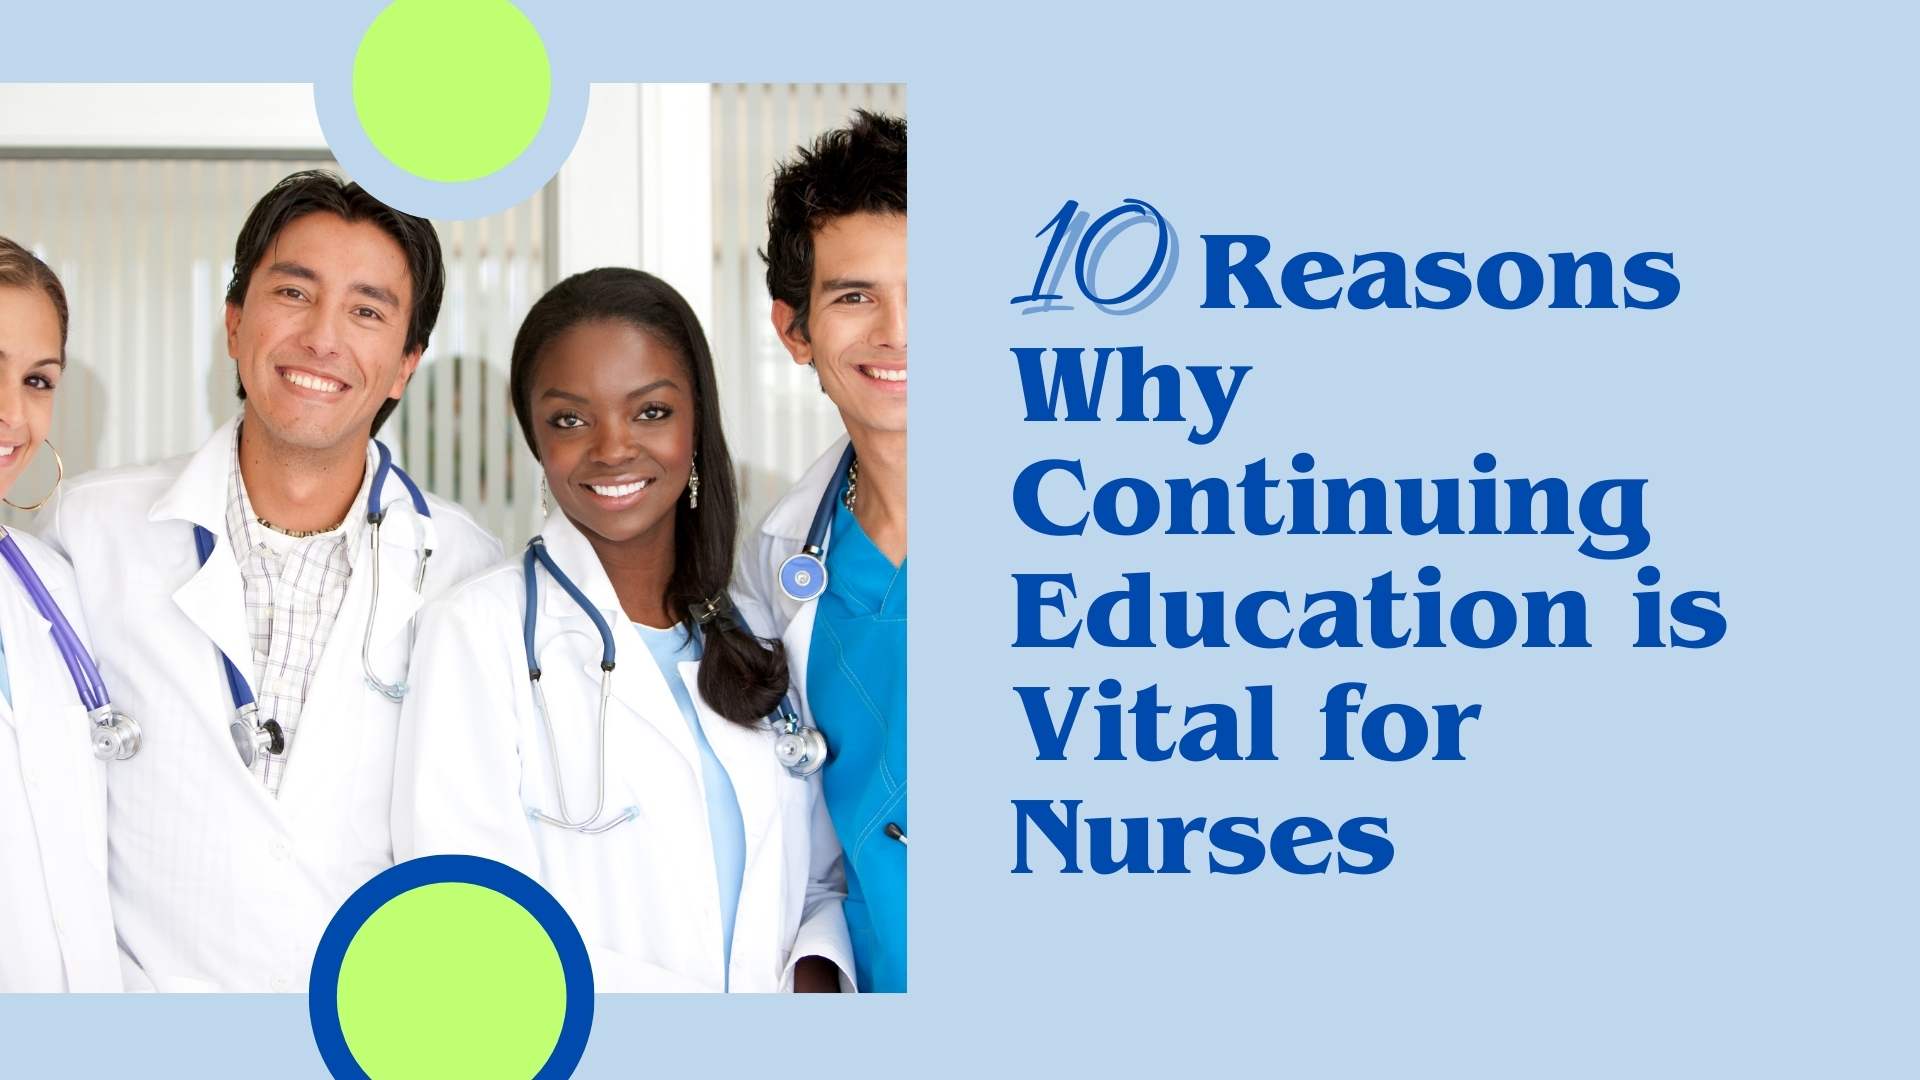 10 Reasons Why Continuing Education is Vital for Nurses